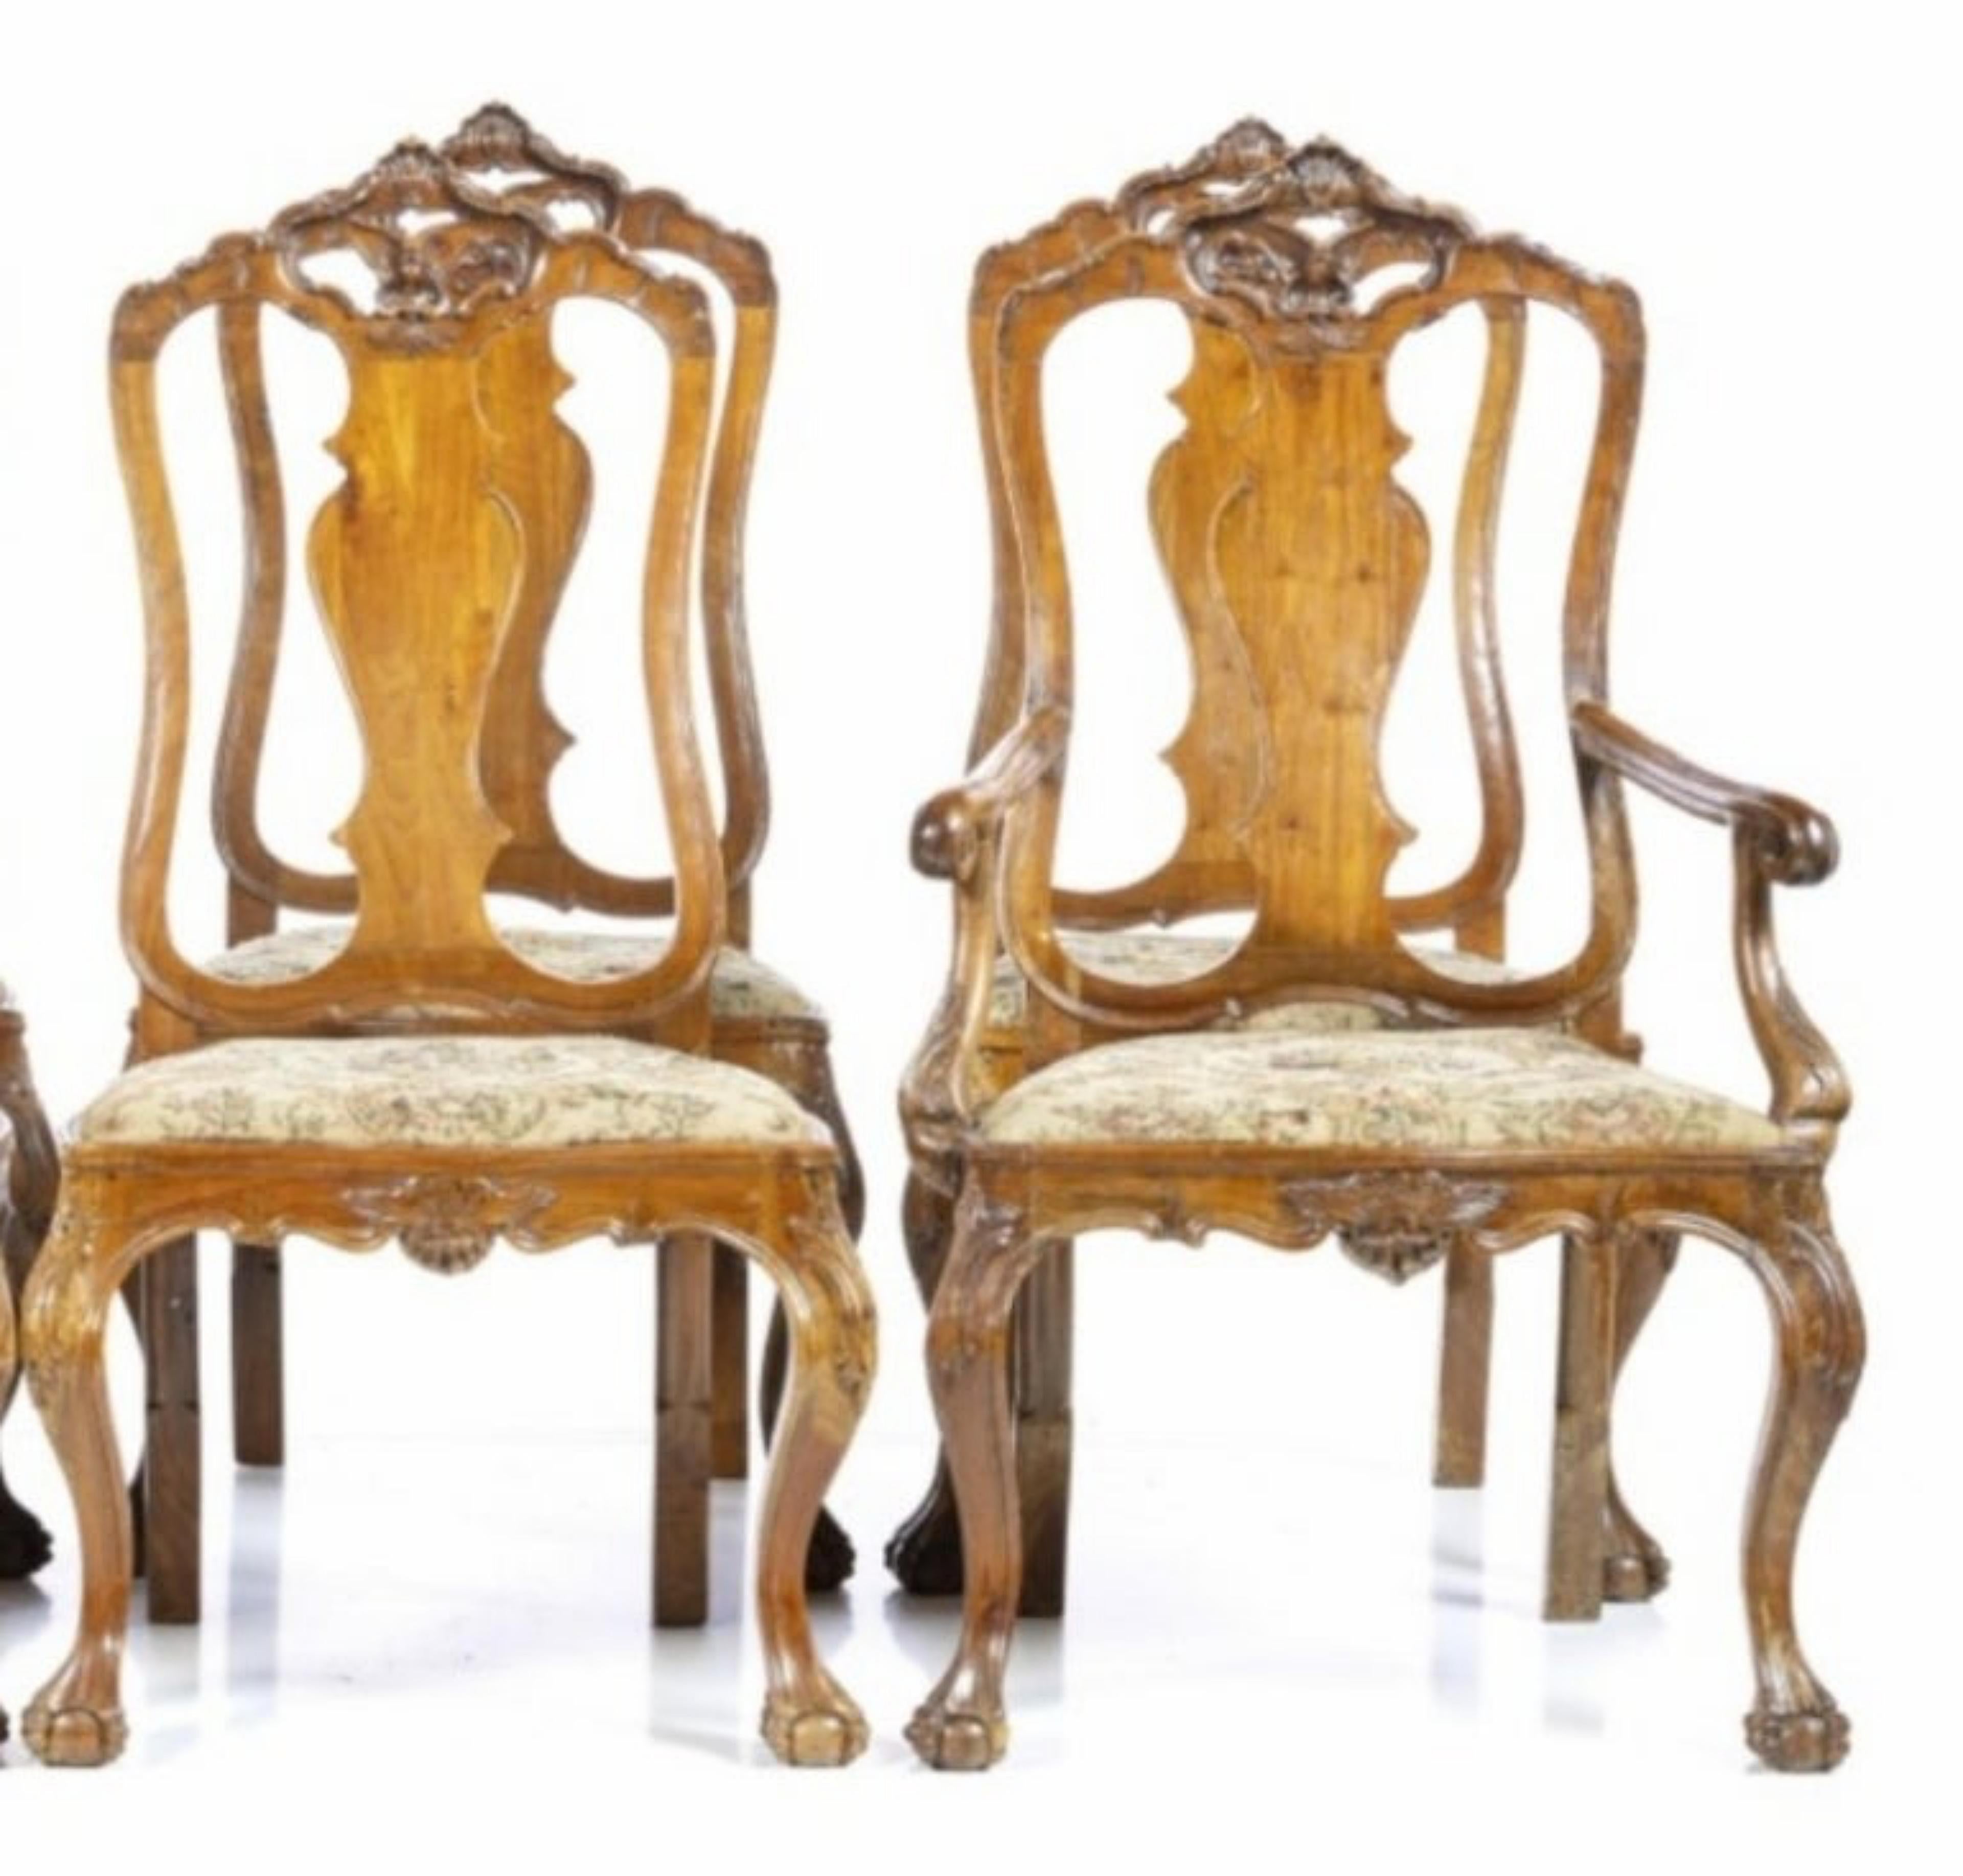 Hand-Crafted Set of Six Portuguese Chairs and Two Chairs D. João v of the 18th Century For Sale